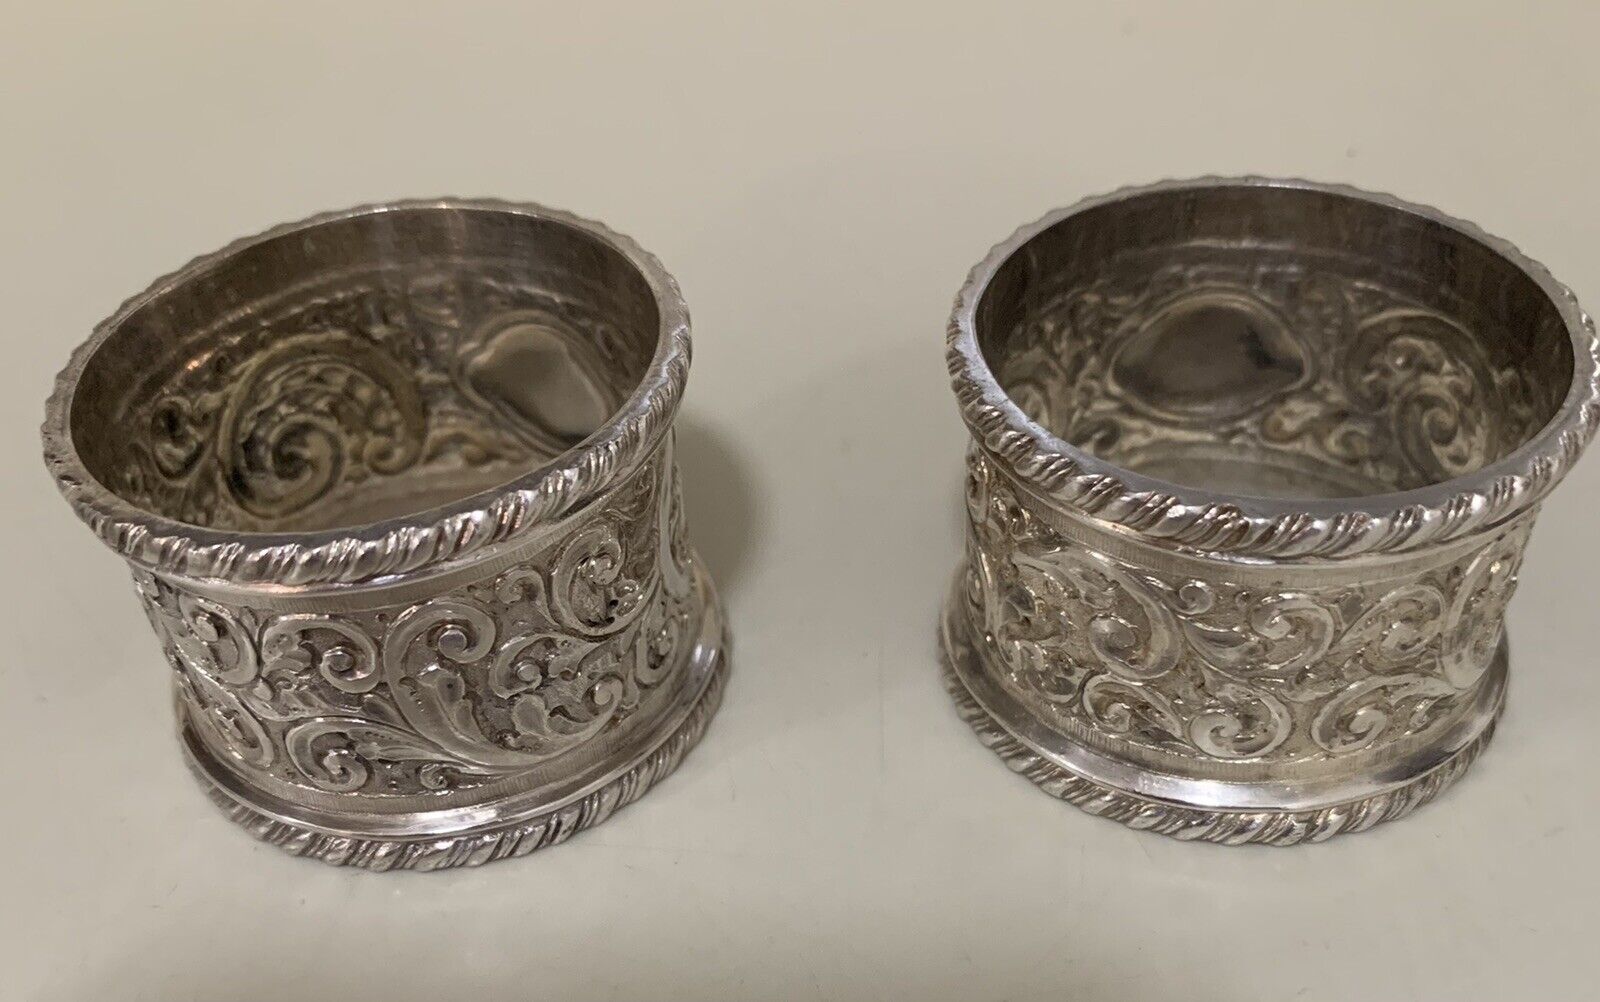 Vintage Silver Plate Napkin Rings With Ornate Design. Round. Sold As A Pair